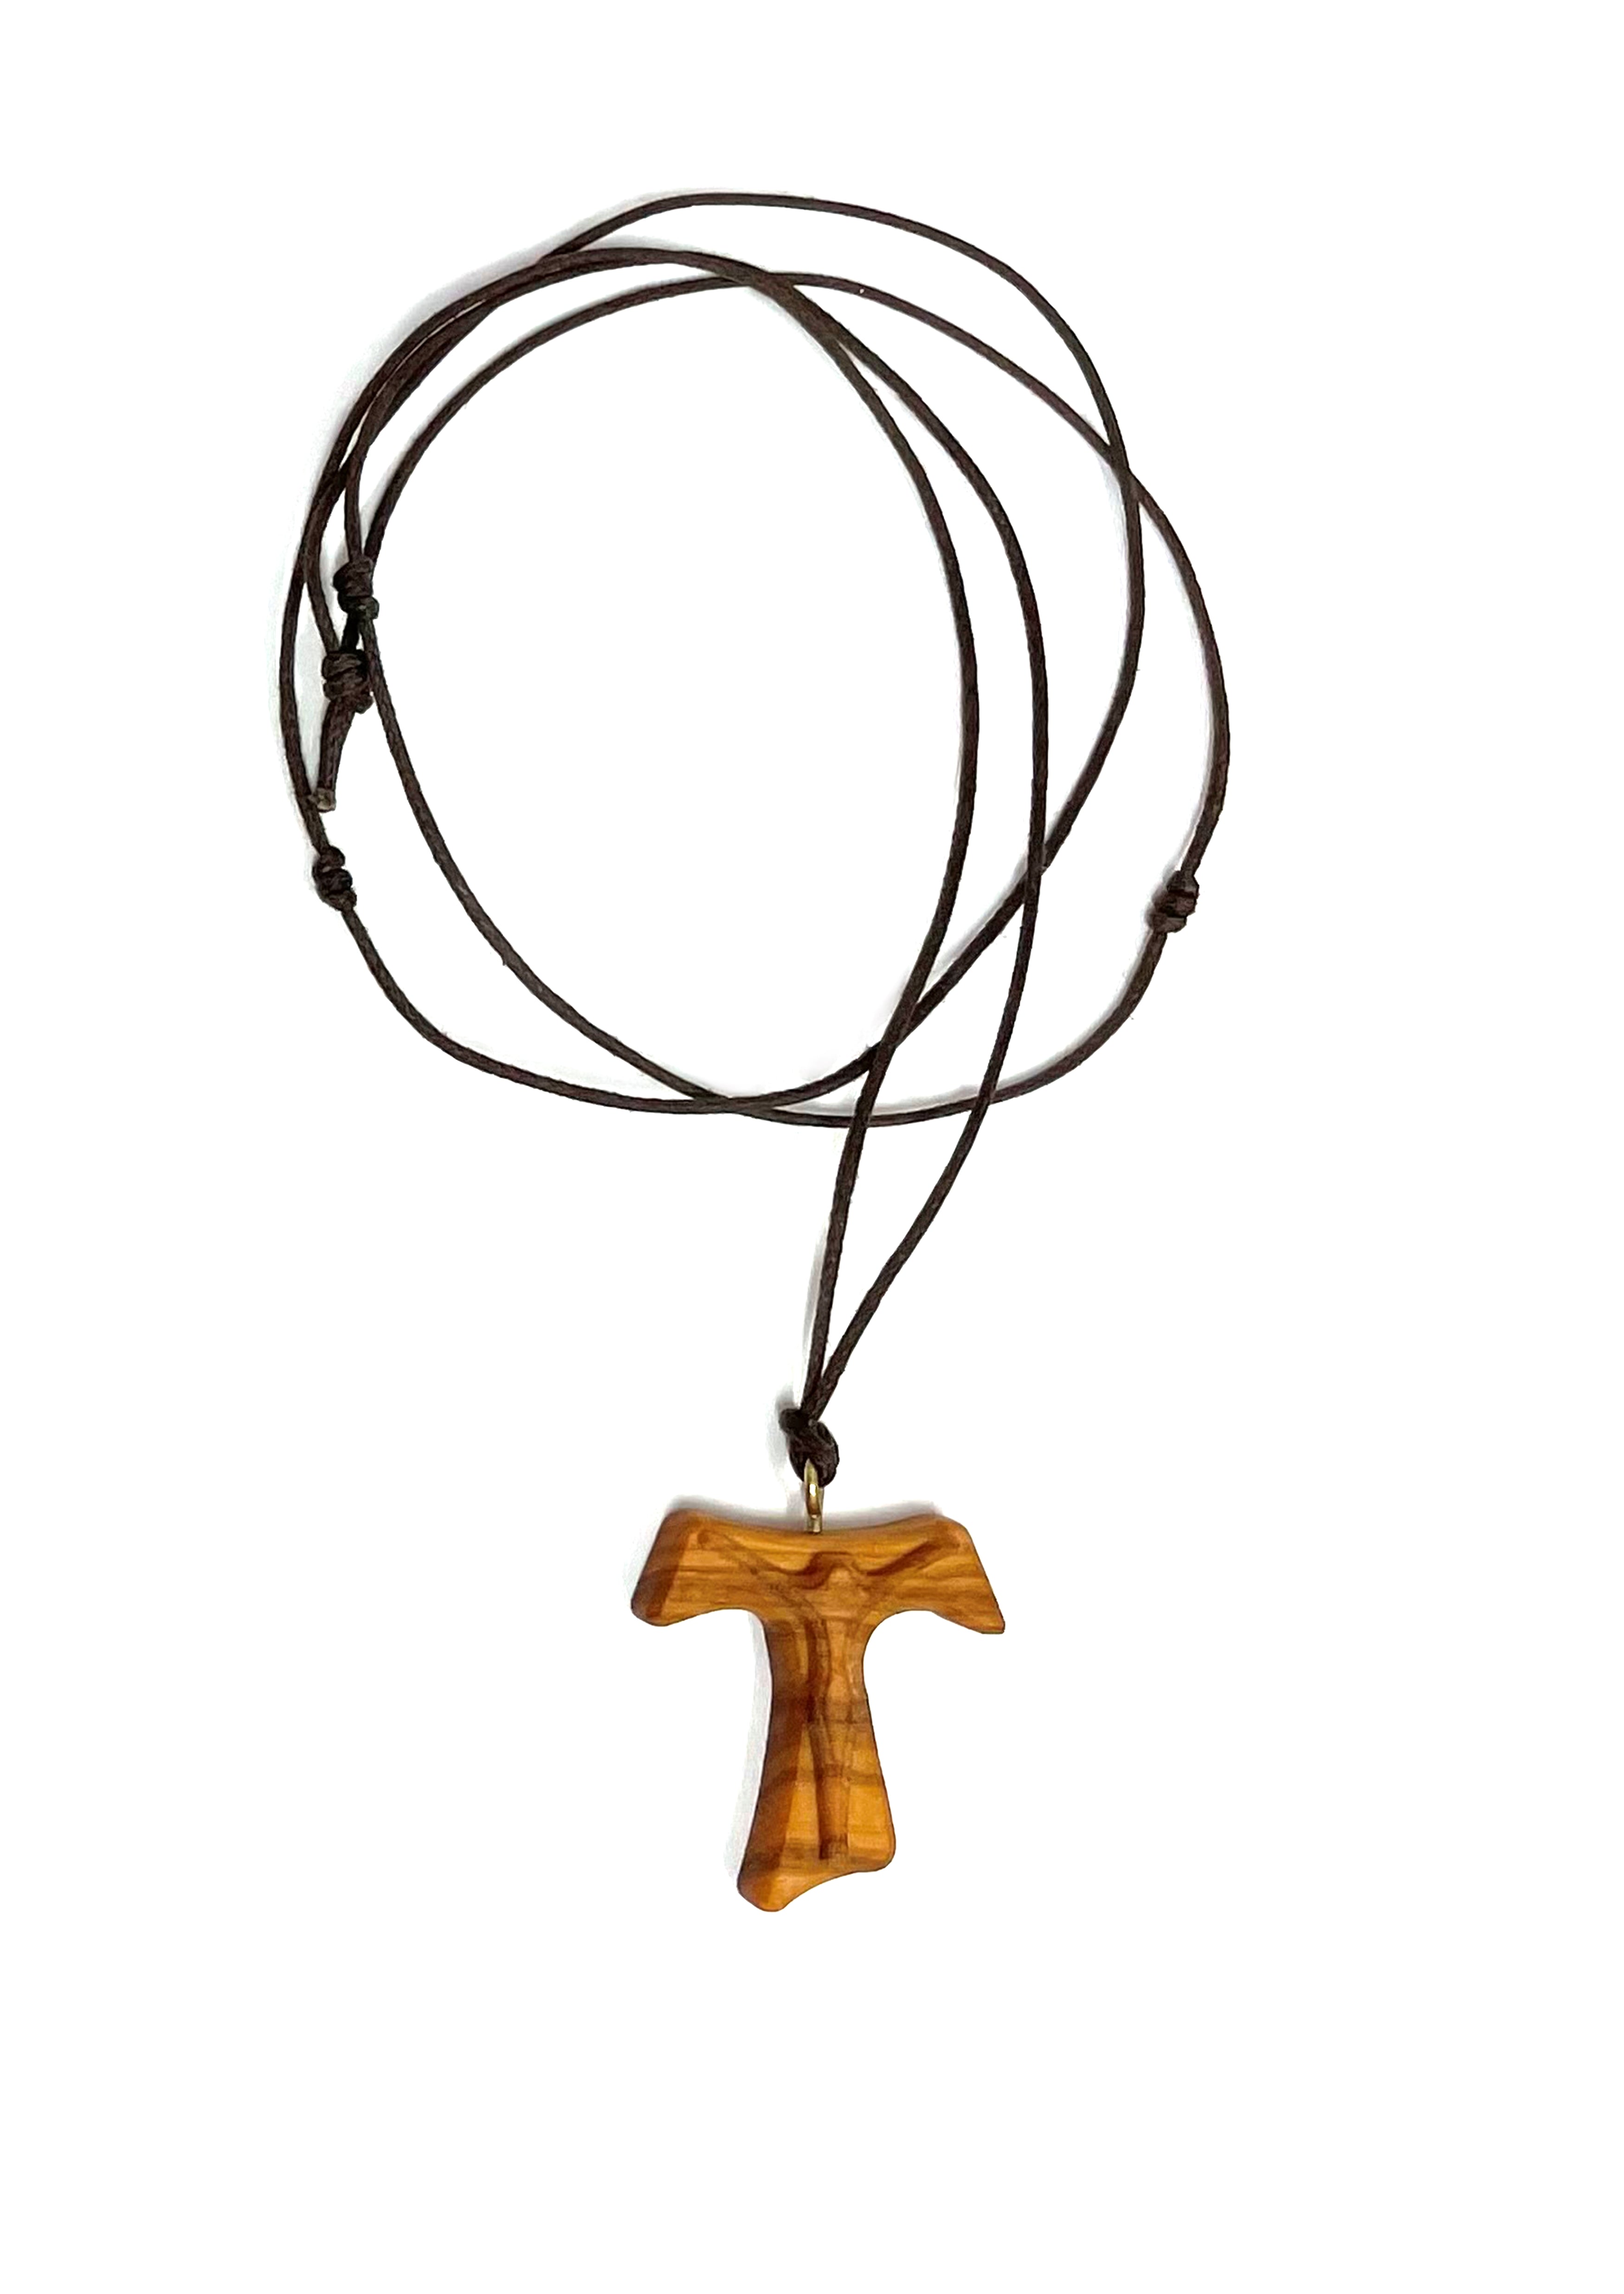 Tau cross with knotted cord